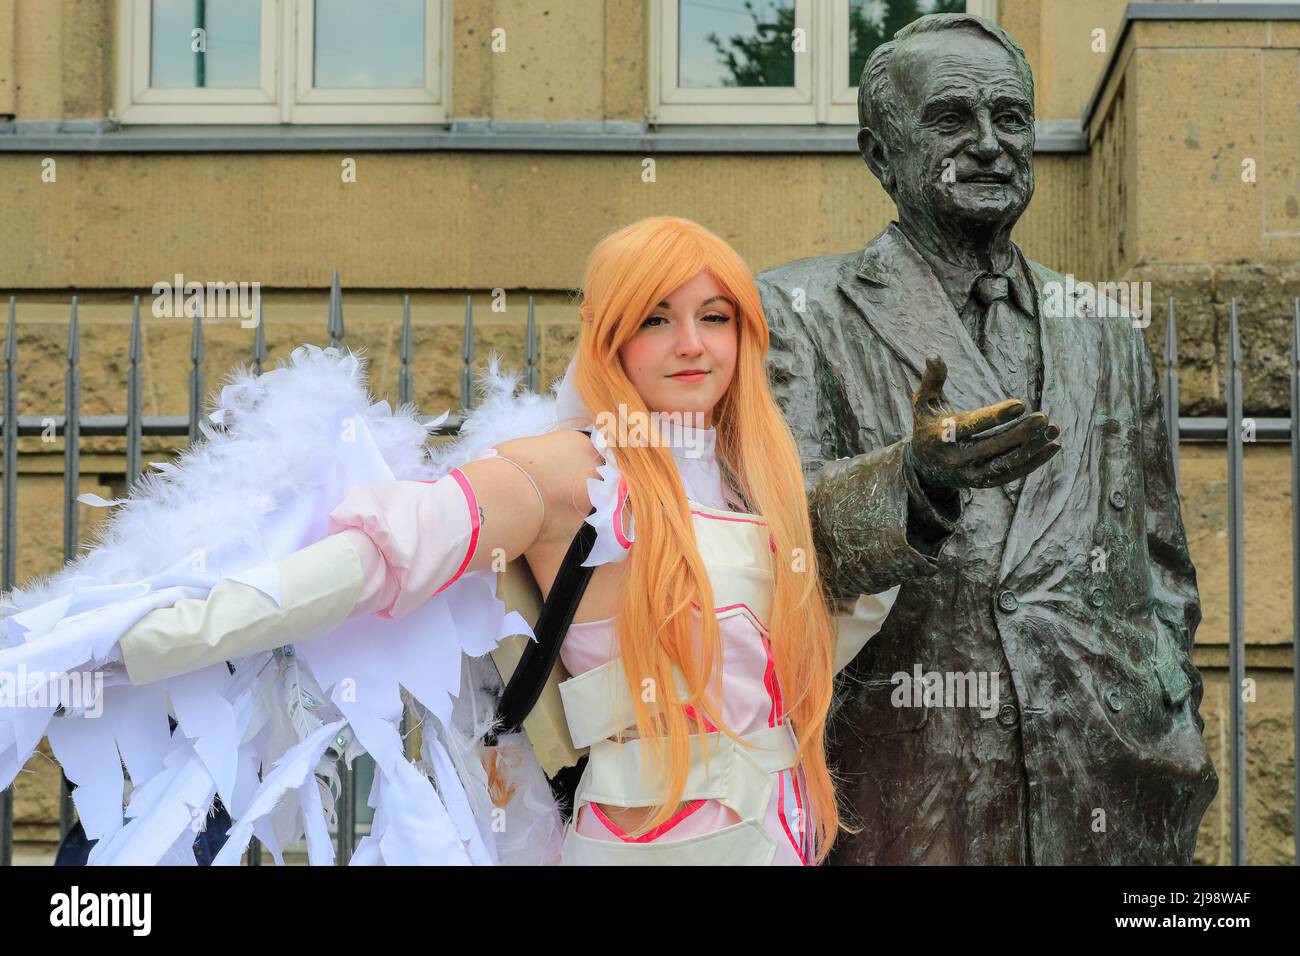 Düsseldorf, NRW, Germany, 21st May 2022. A young woman in cosplay outfit poses with the statue of former premier of NRW, Johannes Rau. Tens of thousands of visitors and cosplayers enjoy the warm sunshine along the river Rhine embankment in their outfits inspired by Japanese anime, video and games. Stage performances, cosplay, stalls and demonstrations of Japanese culture, sports and traditions are featured at Düsseldorf's annual Japan Day, celebrating Japan and the Japanese community in the city. Düsseldorf is home to the largest Japanese community in Germany. Stock Photo